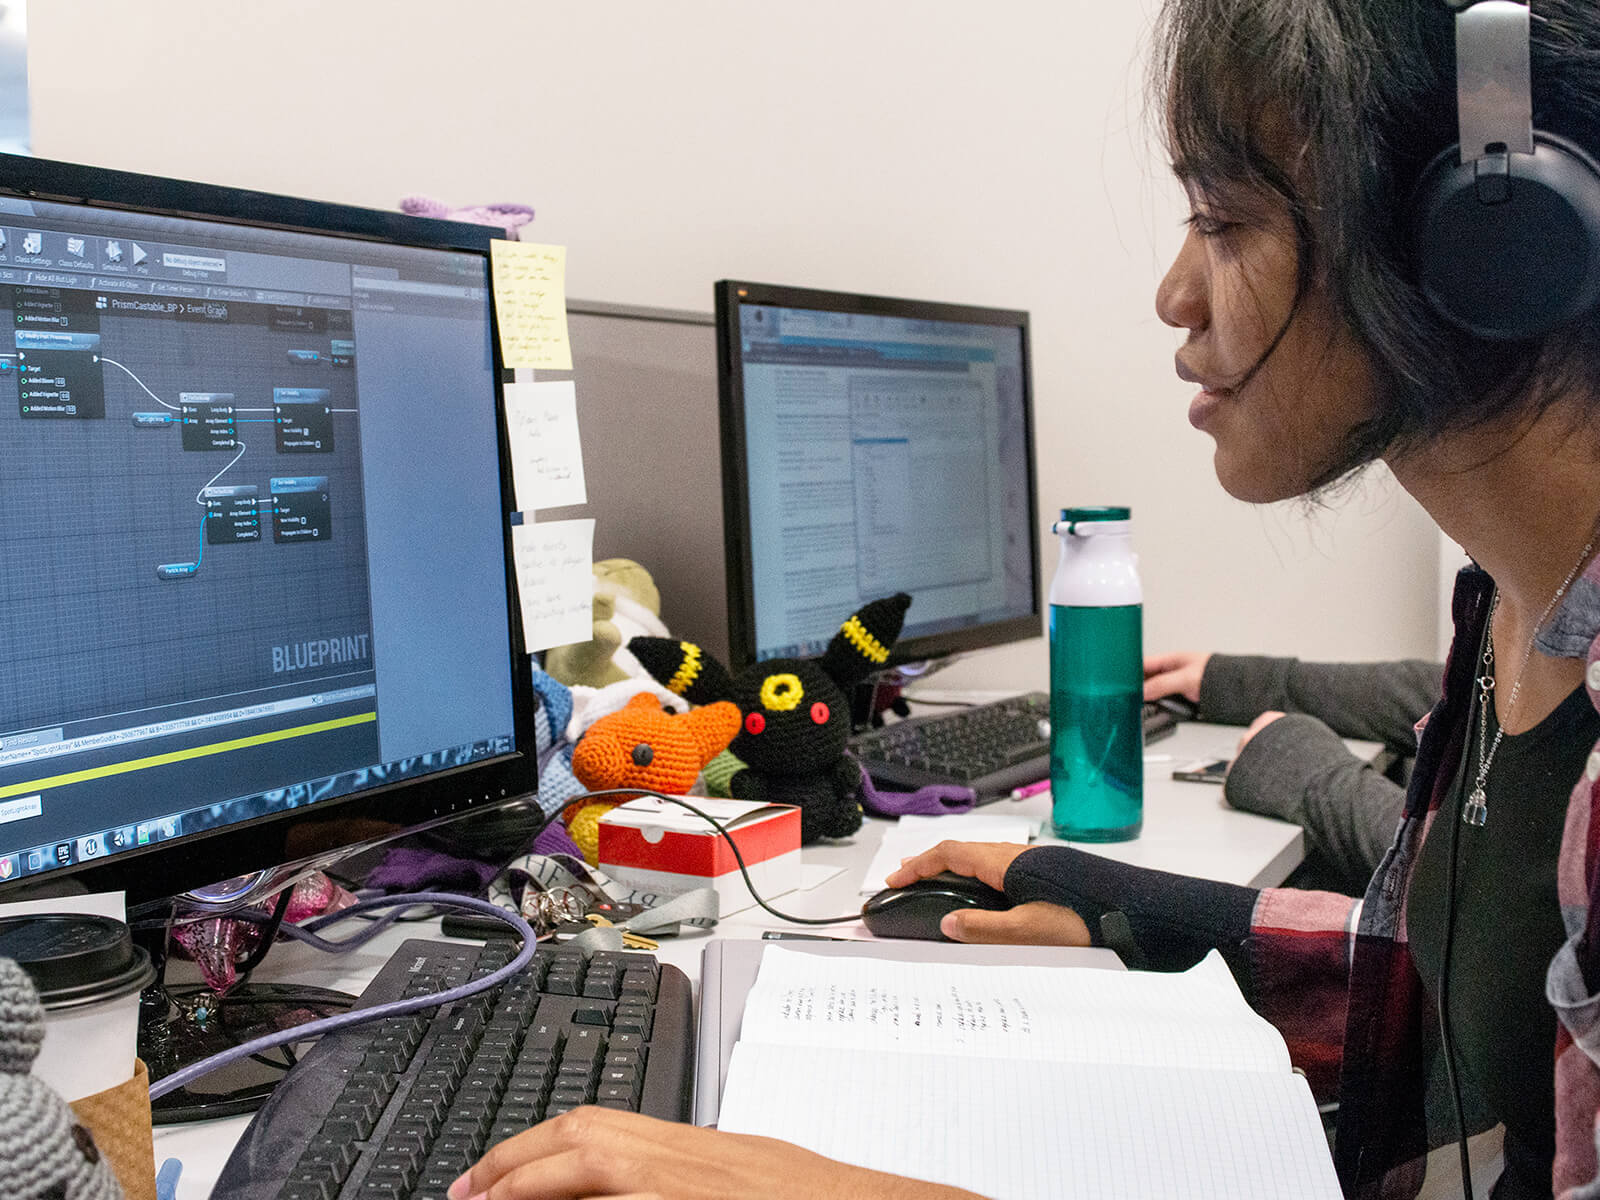 A DigiPen game design student works on her computer surrounded by knit plush toys.